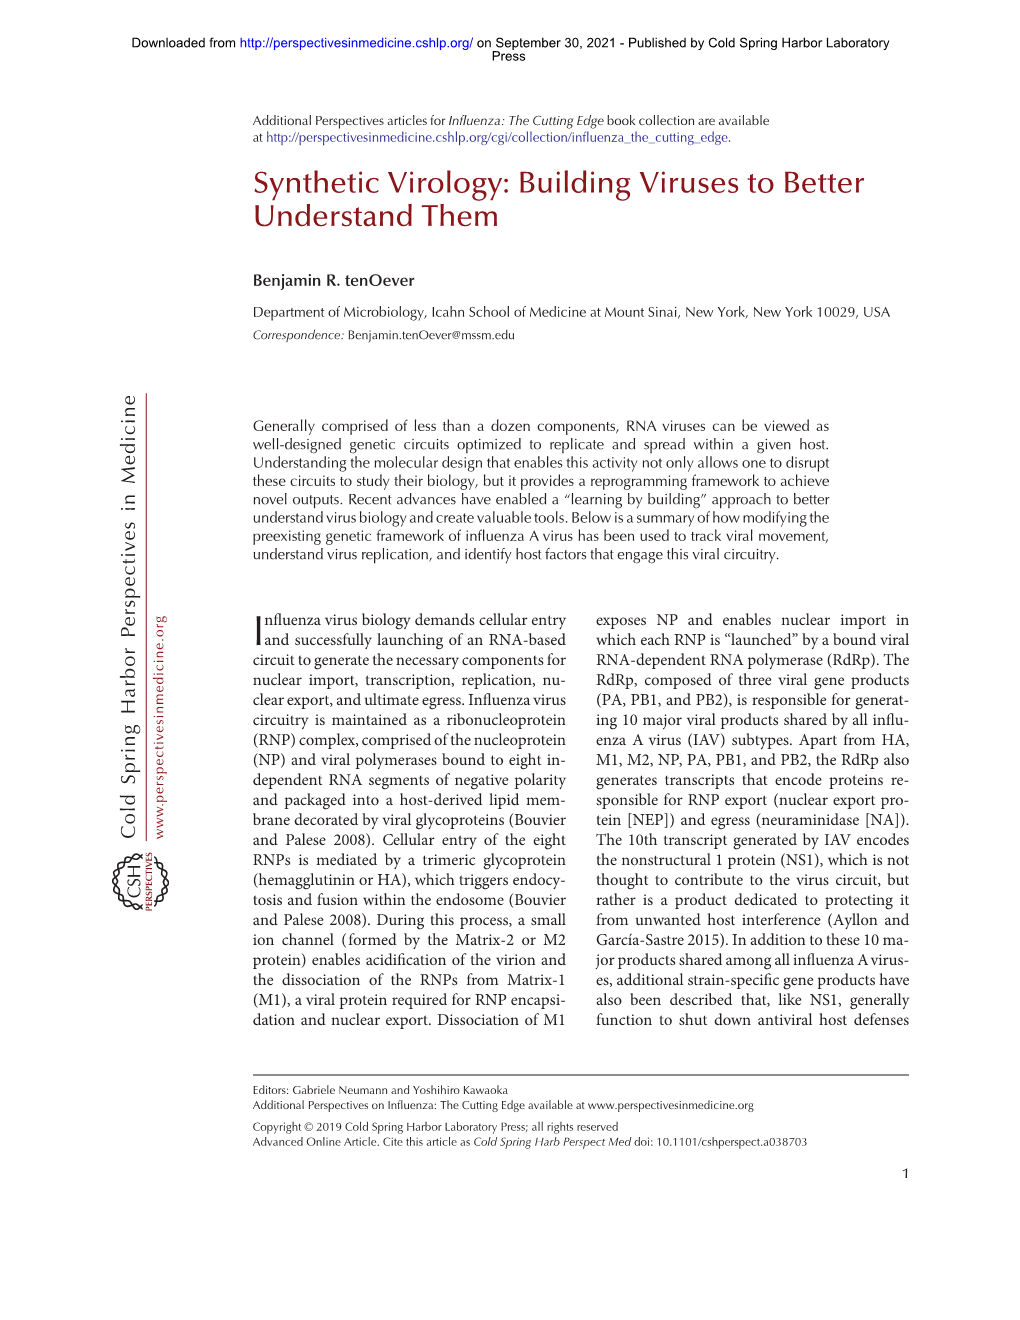 Synthetic Virology: Building Viruses to Better Understand Them